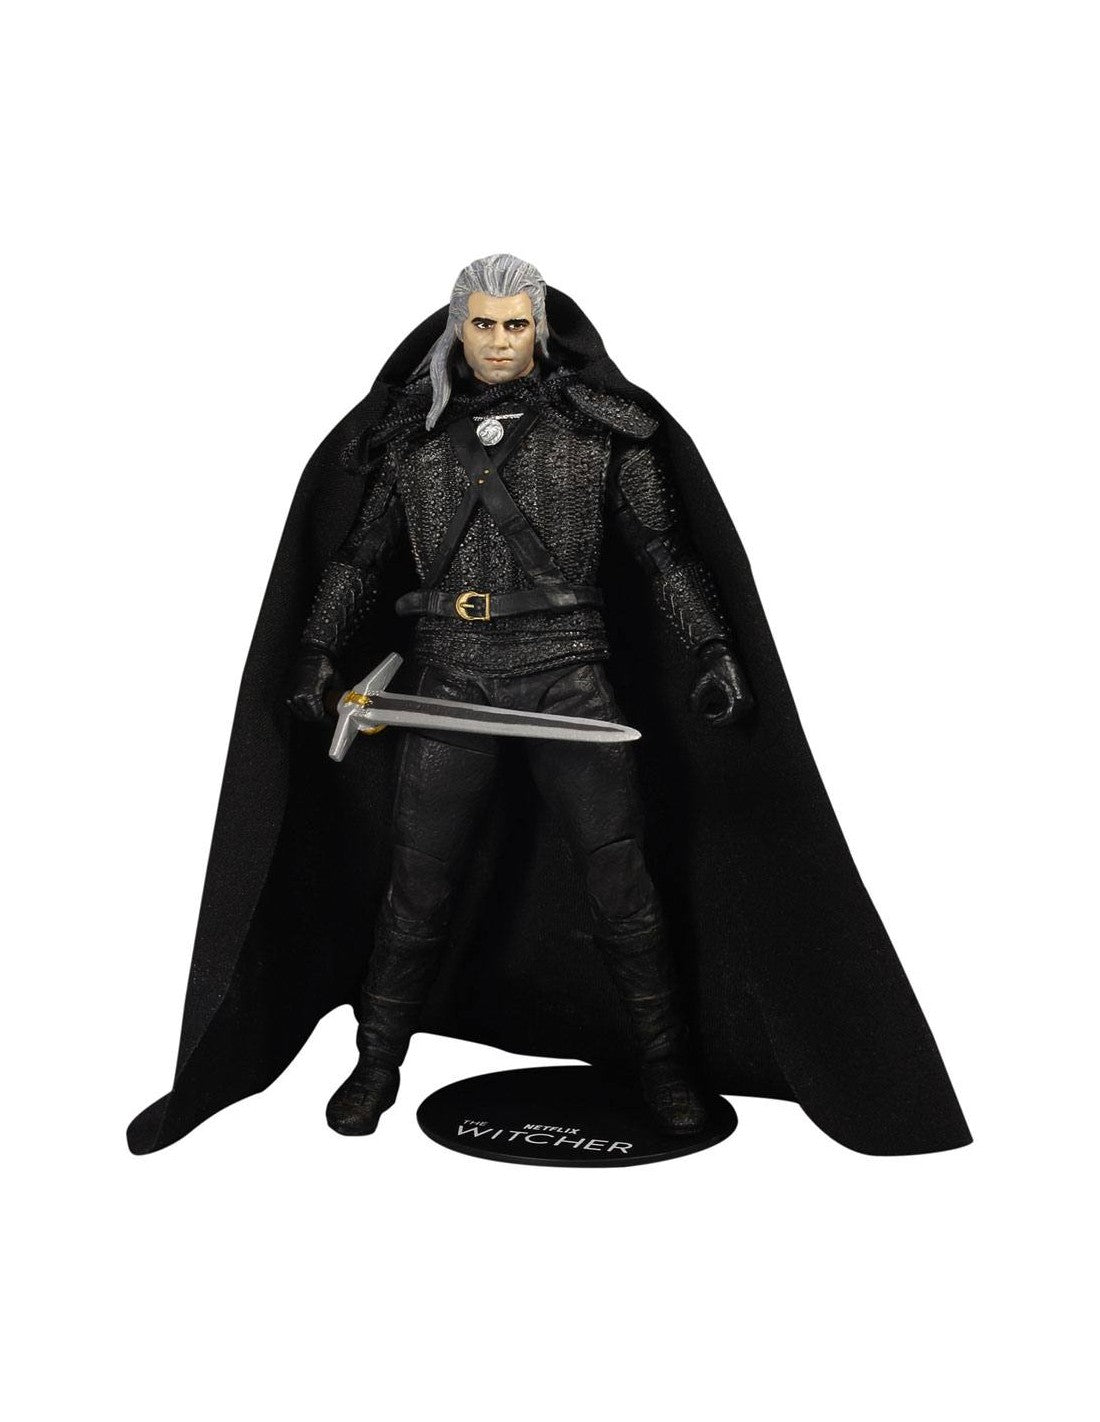 McFarlane Toys The Witcher Geralt of Rivia